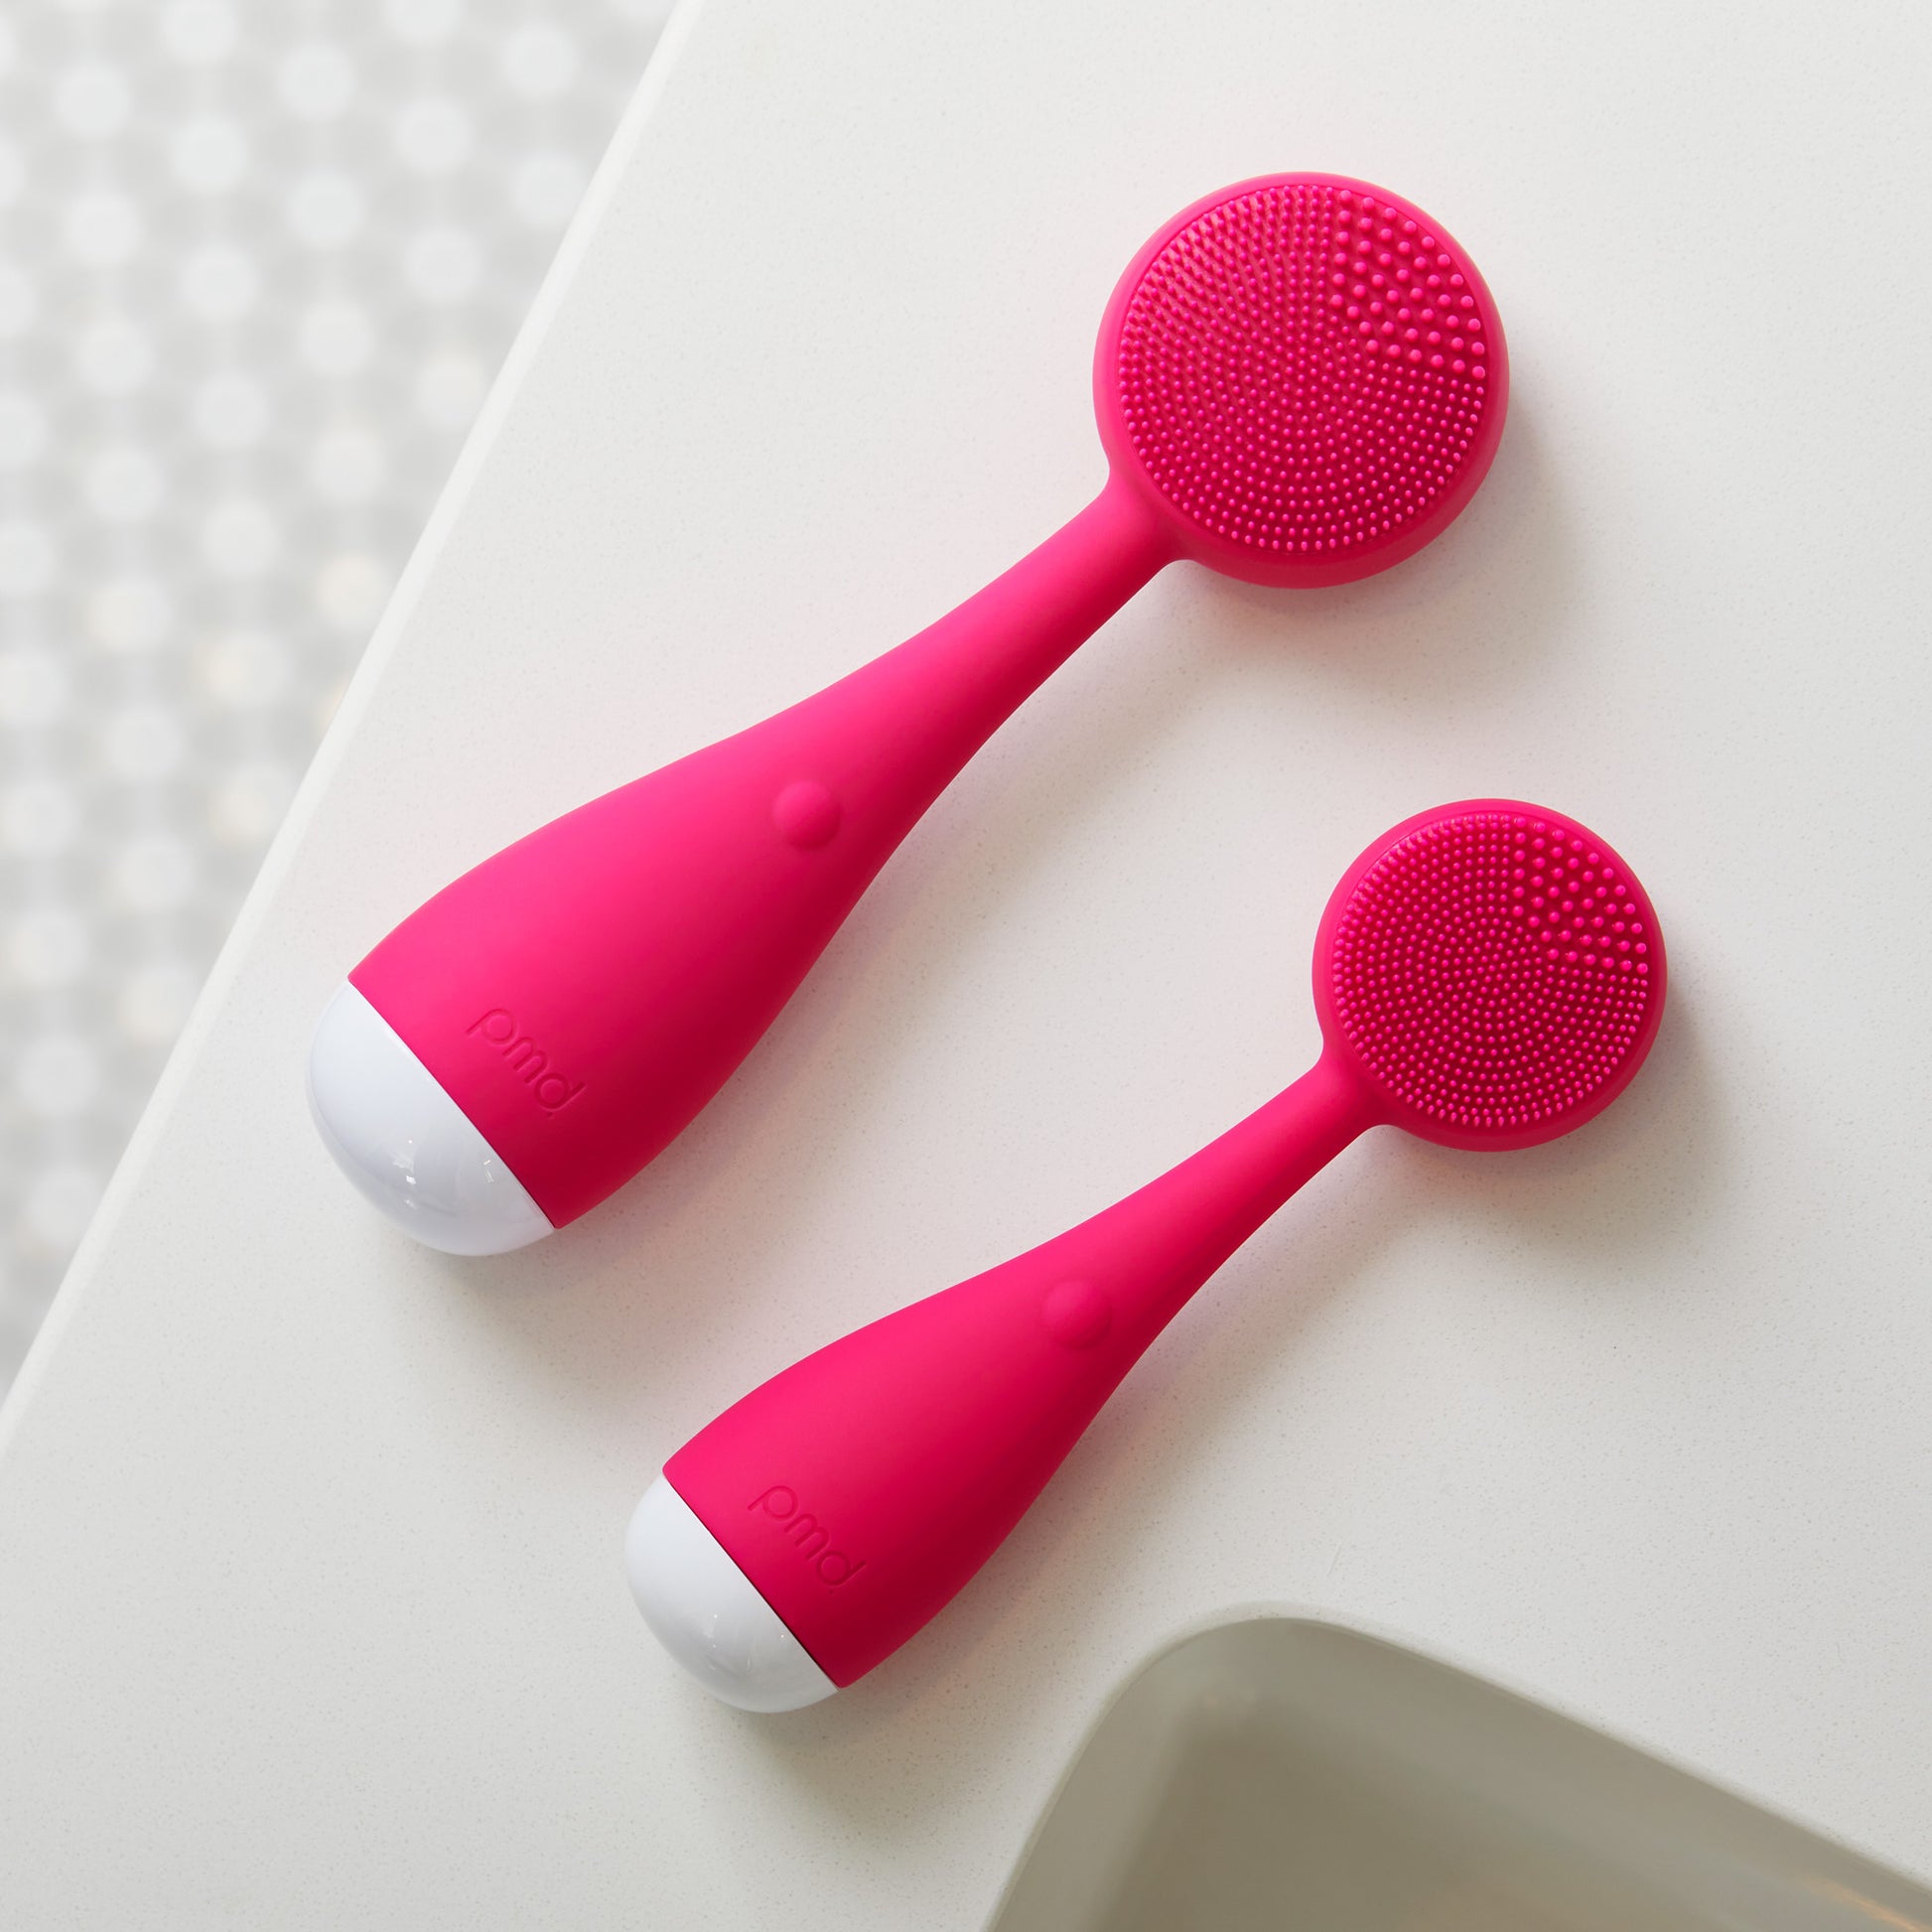 PMD Clean Mini - Compact Facial Cleansing Device